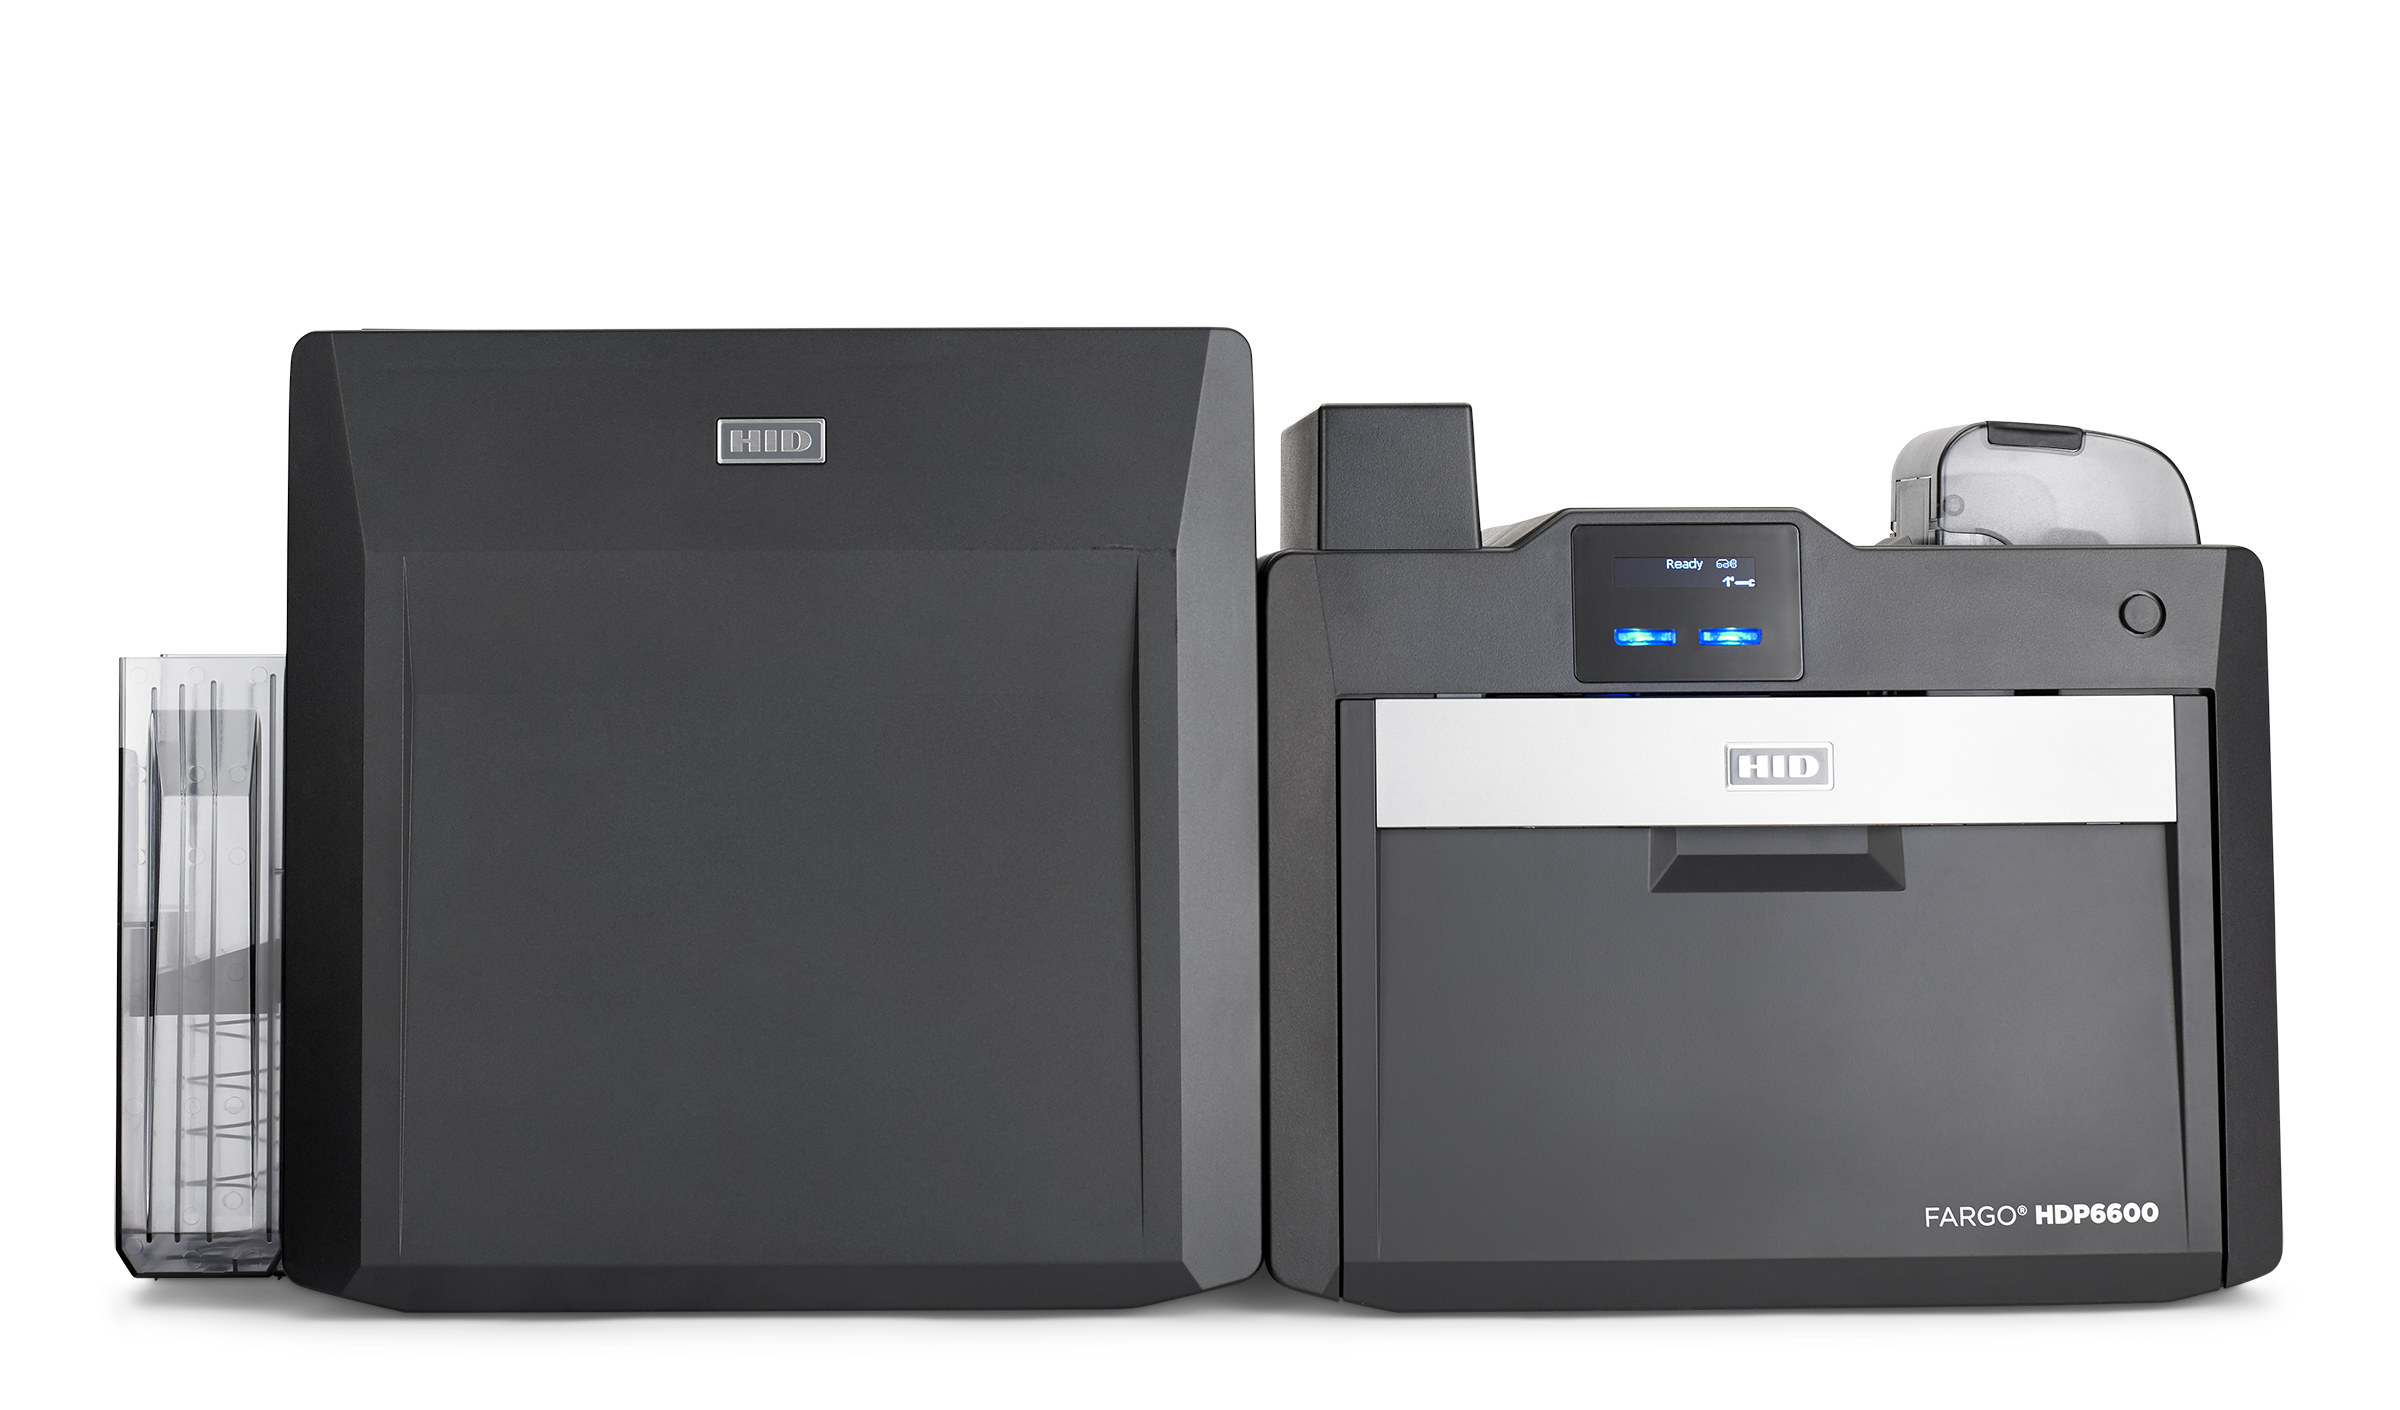 The FARGO® HDP6600 Printer is an advanced printer used for high resolution photo ID badge printing.